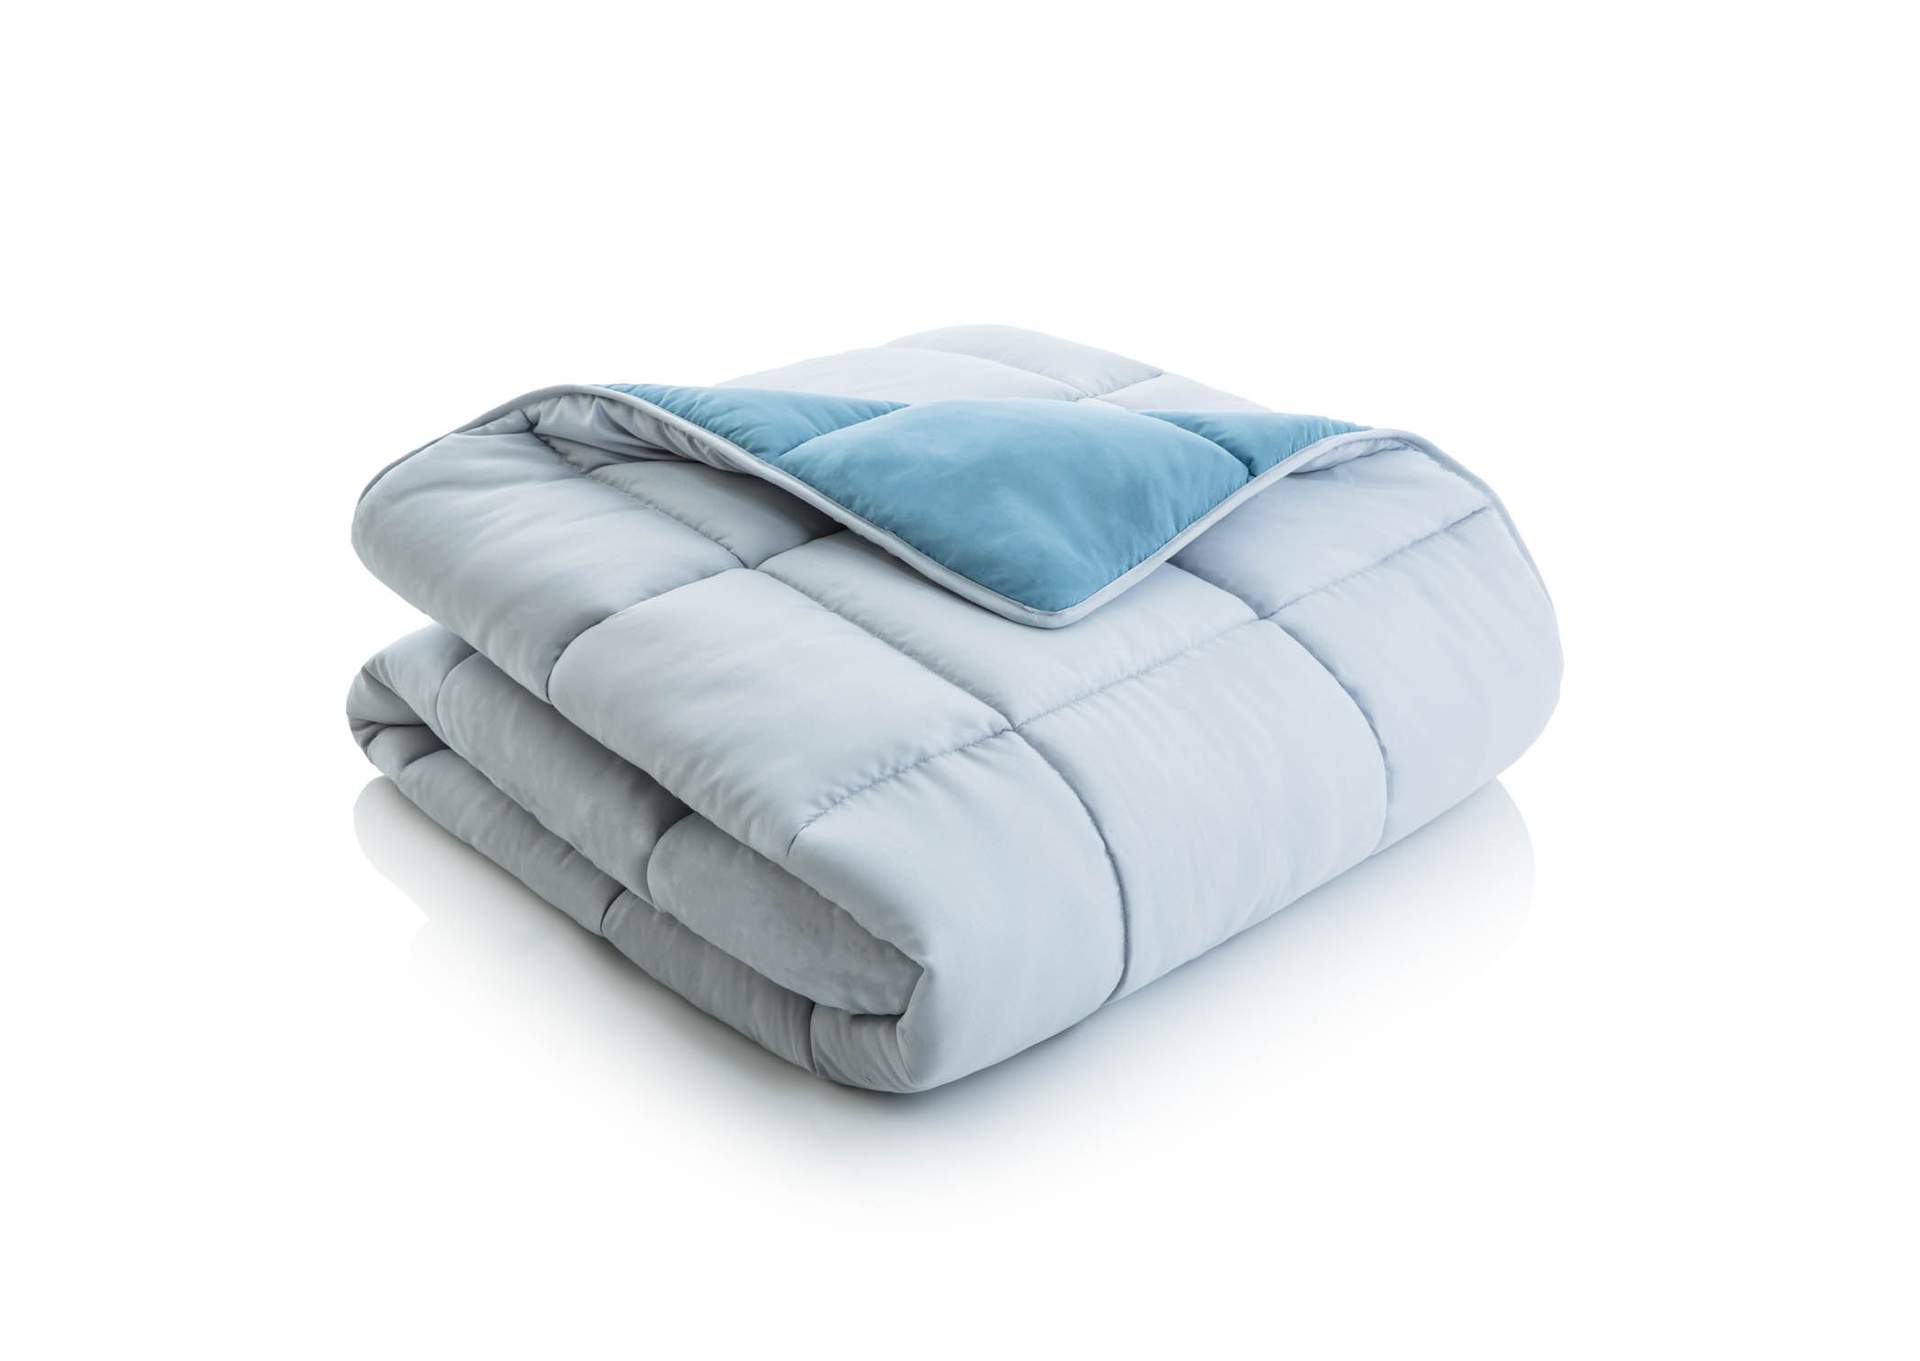 Malouf Pacific/Ash Bed in a Bag Reversible Comforters & Duvets - King Size,Malouf